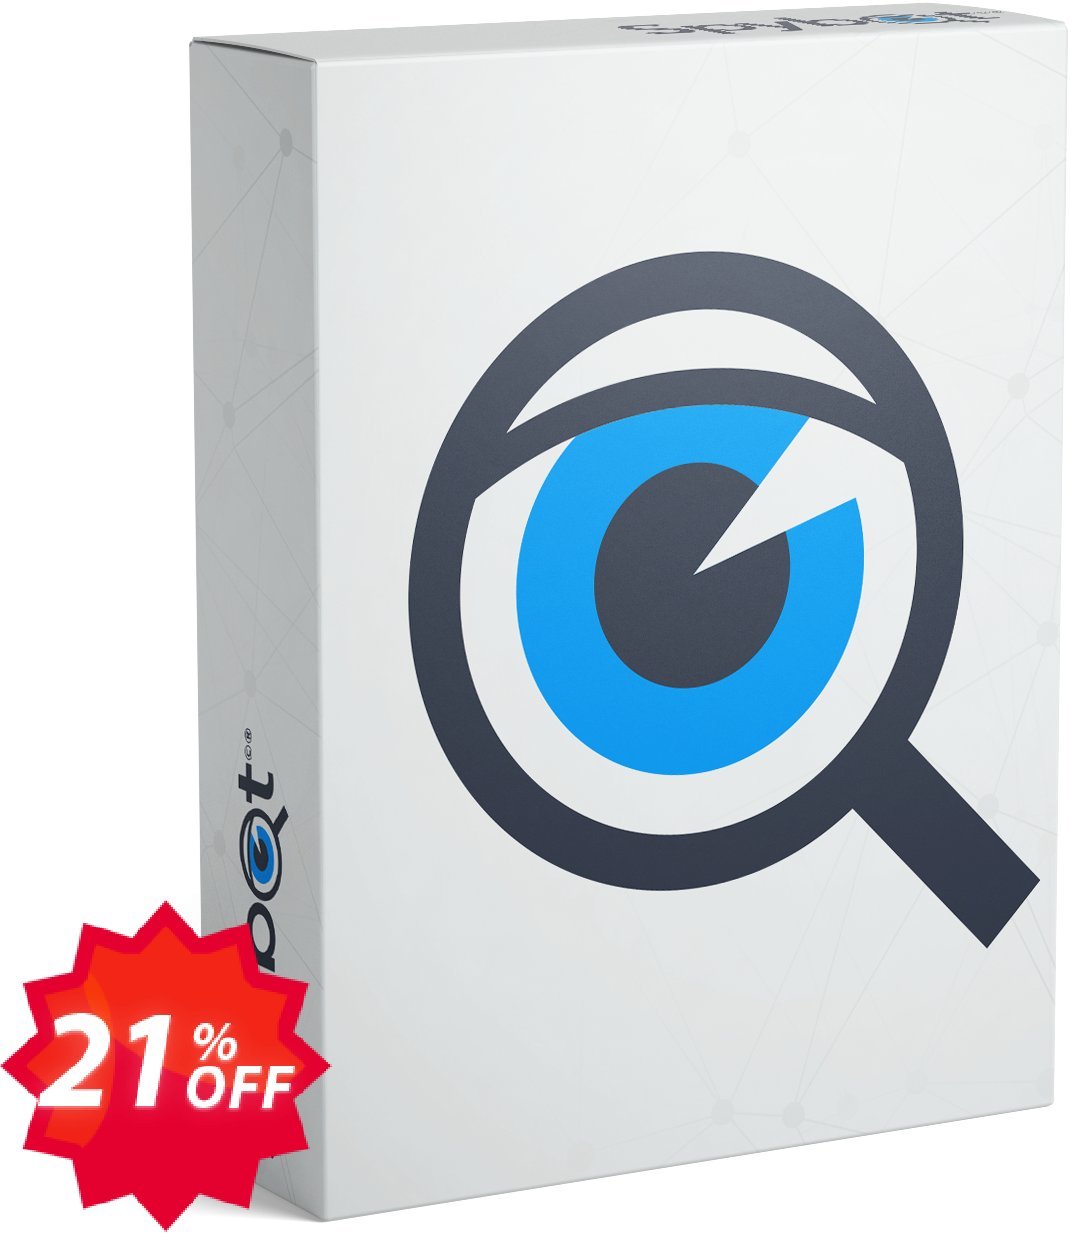 Spybot Corporate Edition Coupon code 21% discount 